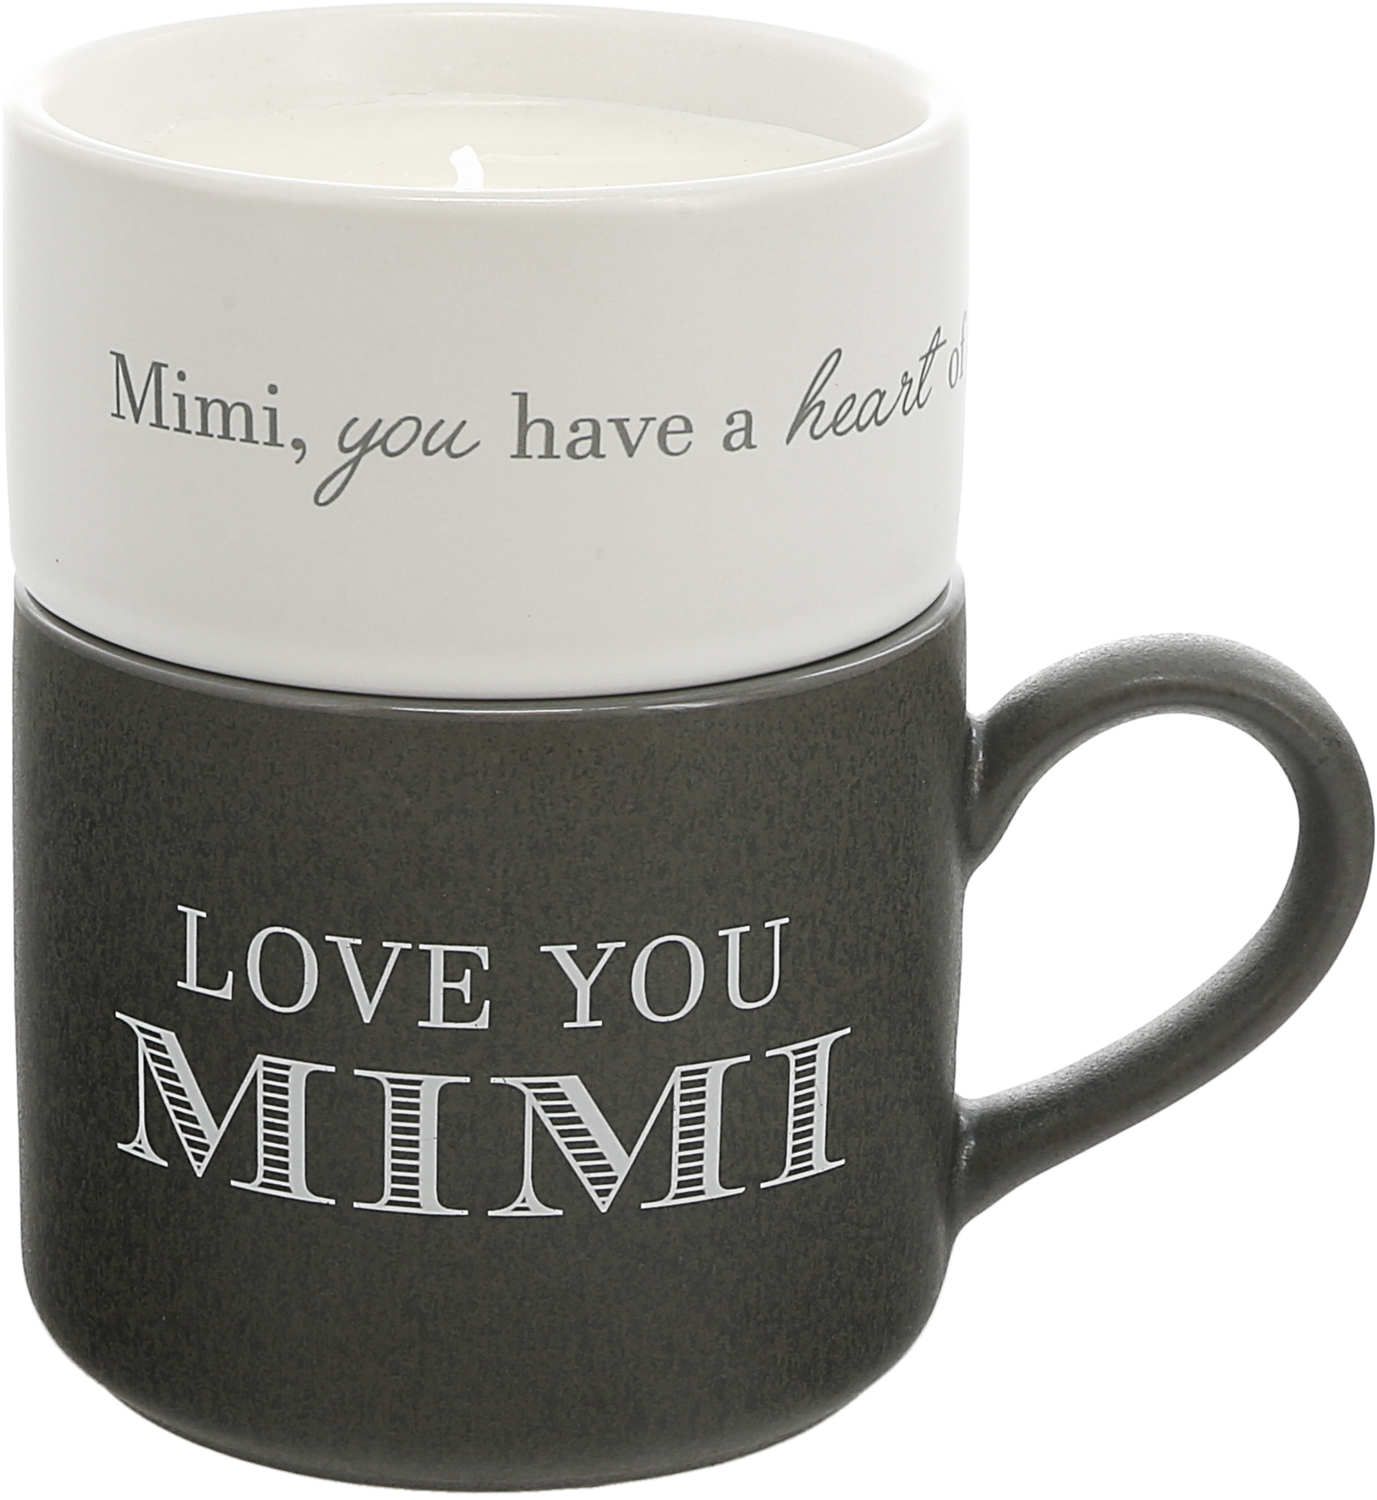 Mimi by Filled with Warmth - Mimi - Stacking Mug and Candle Set
100% Soy Wax Scent: Tranquility